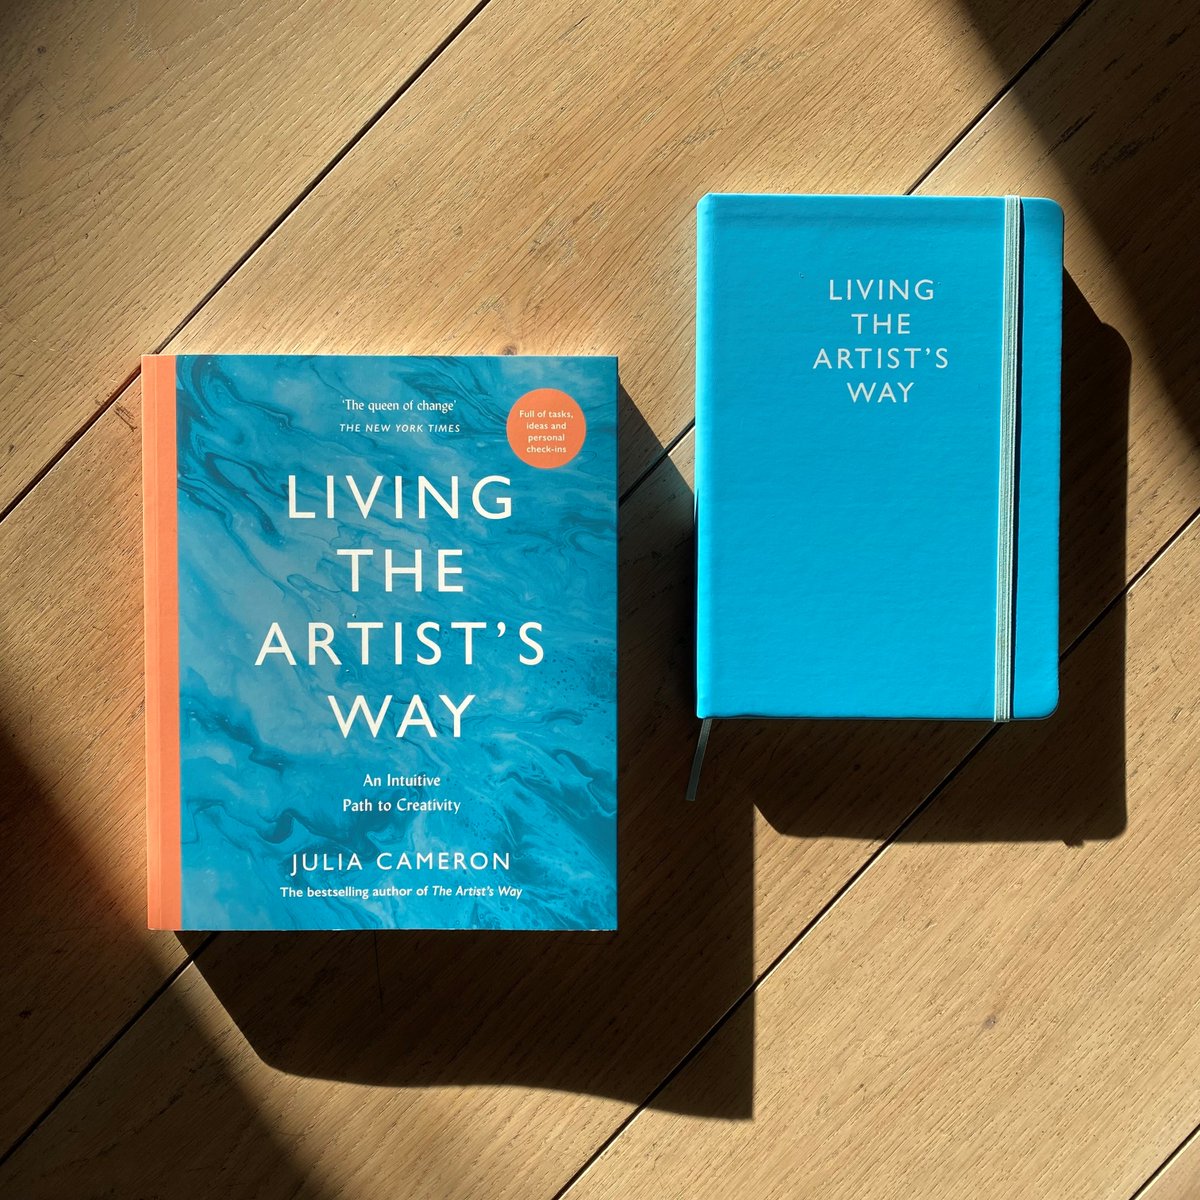 GIVEAWAY ALERT 🚨 We have two notebooks and two copies of Living The Artist's Way by @J_CameronLive from @ProfileBooks All you need to do is to follow us and retweet by 5pm UK time on Thursday 11th January to be in with a chance of winning. #bookgiveaway #writingcommunity